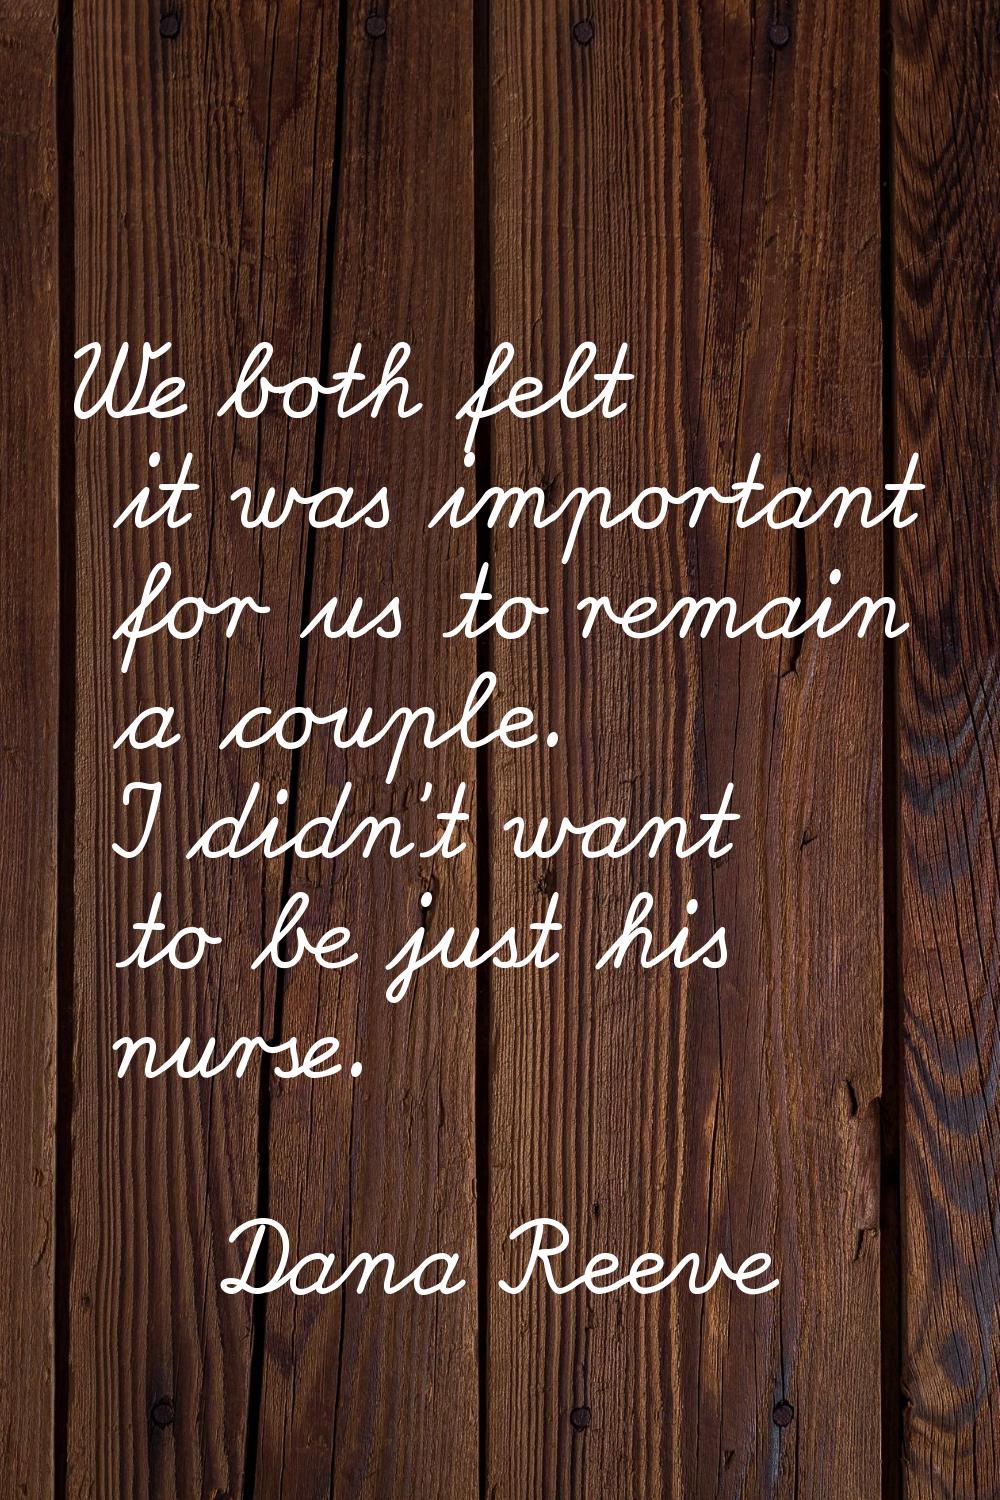 We both felt it was important for us to remain a couple. I didn't want to be just his nurse.